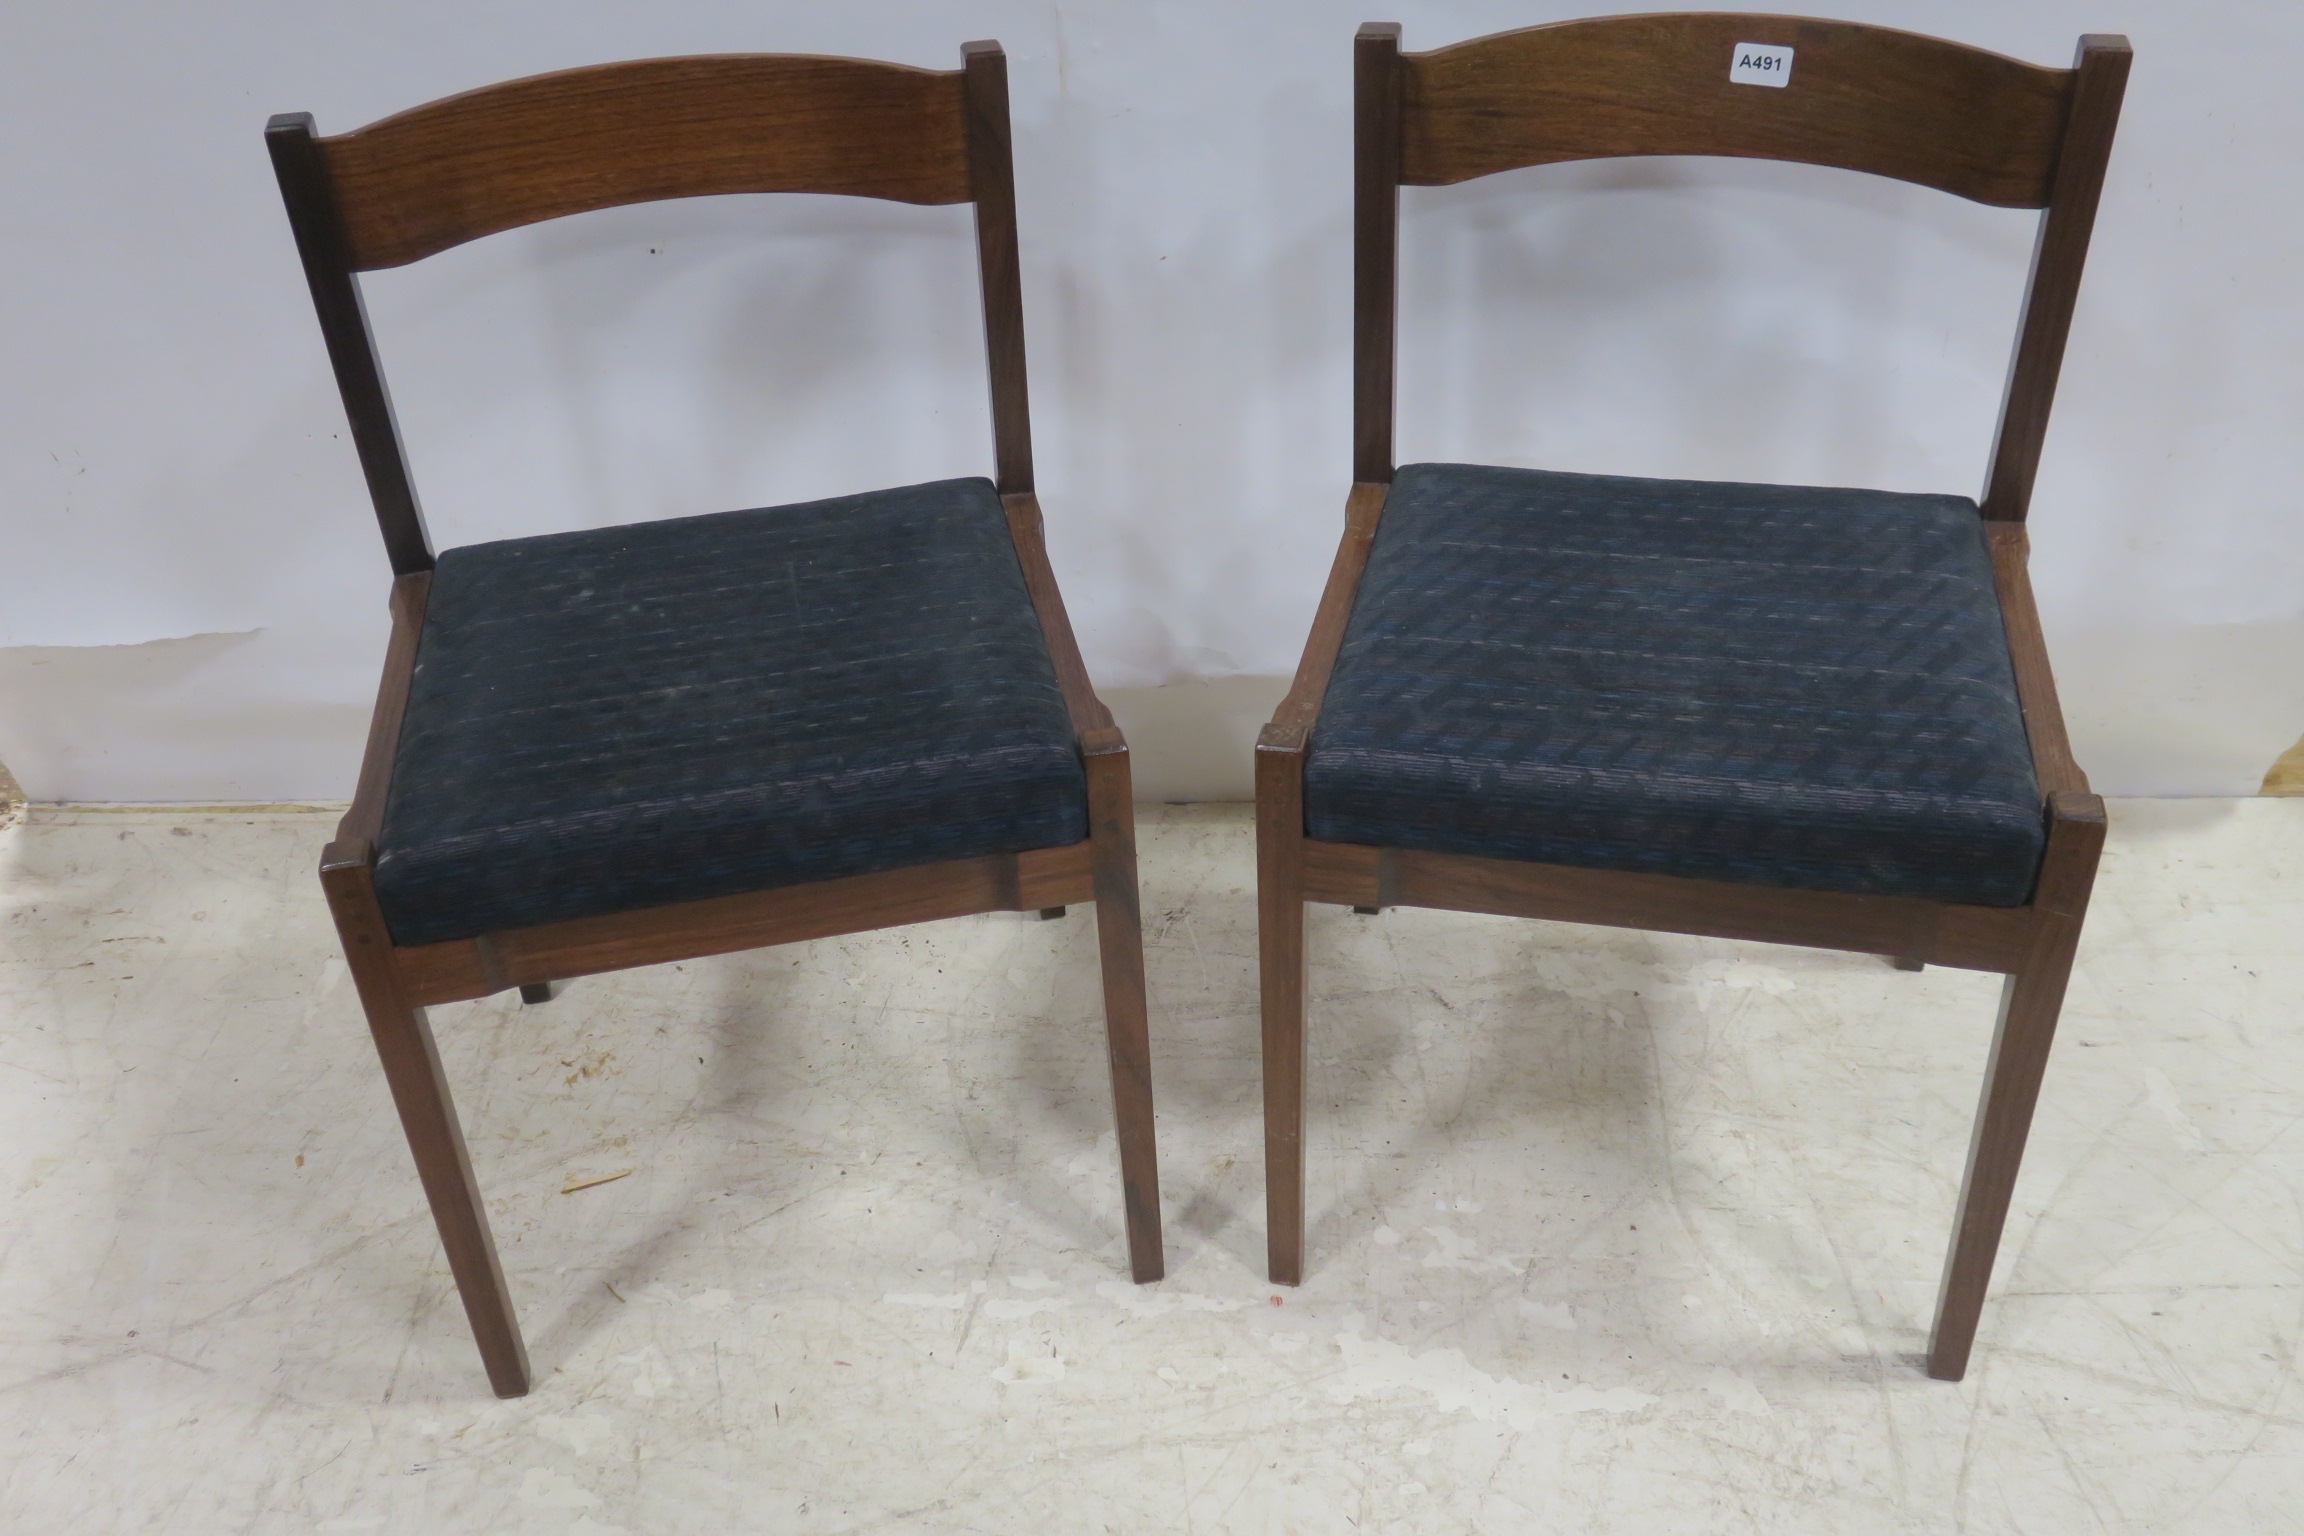 A SET OF SIX CIRCA 1960s DINING CHAIRS by Gianfranco Frattini for Cassina each with a curved top